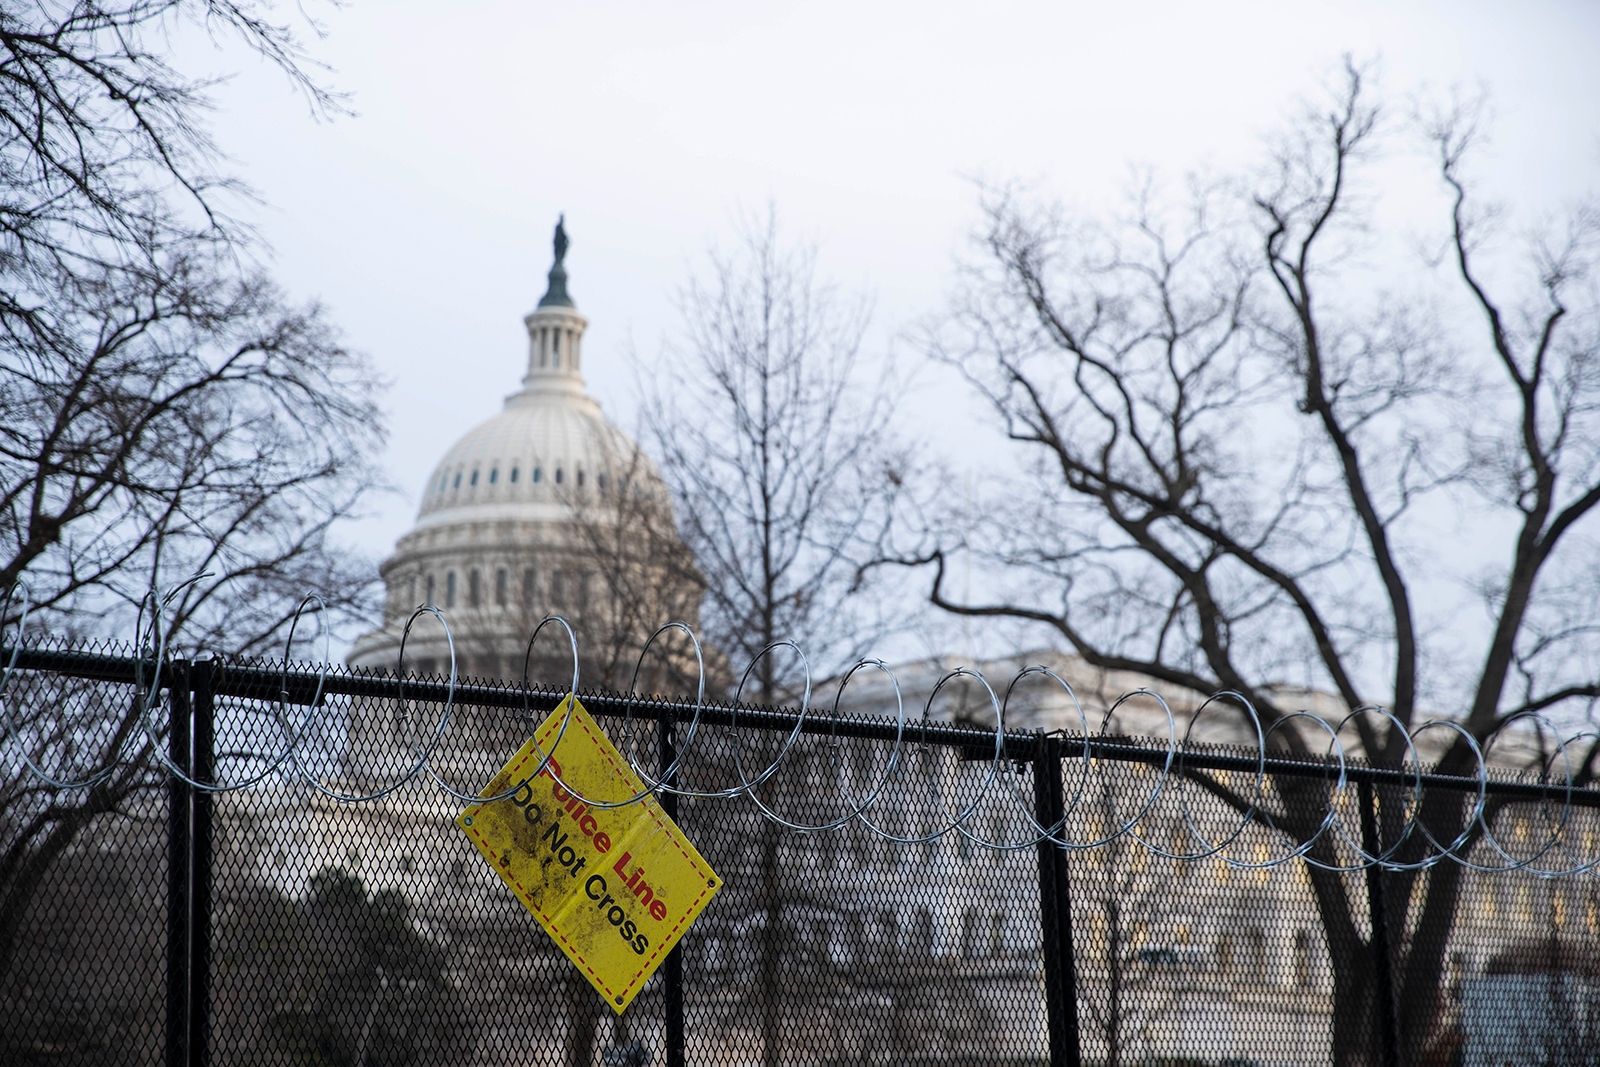 A sign reading 'Police Line Do Not Cross' hangs from the fenced perimeter surrounding the US Capitol in Washington, DC, on February 10.